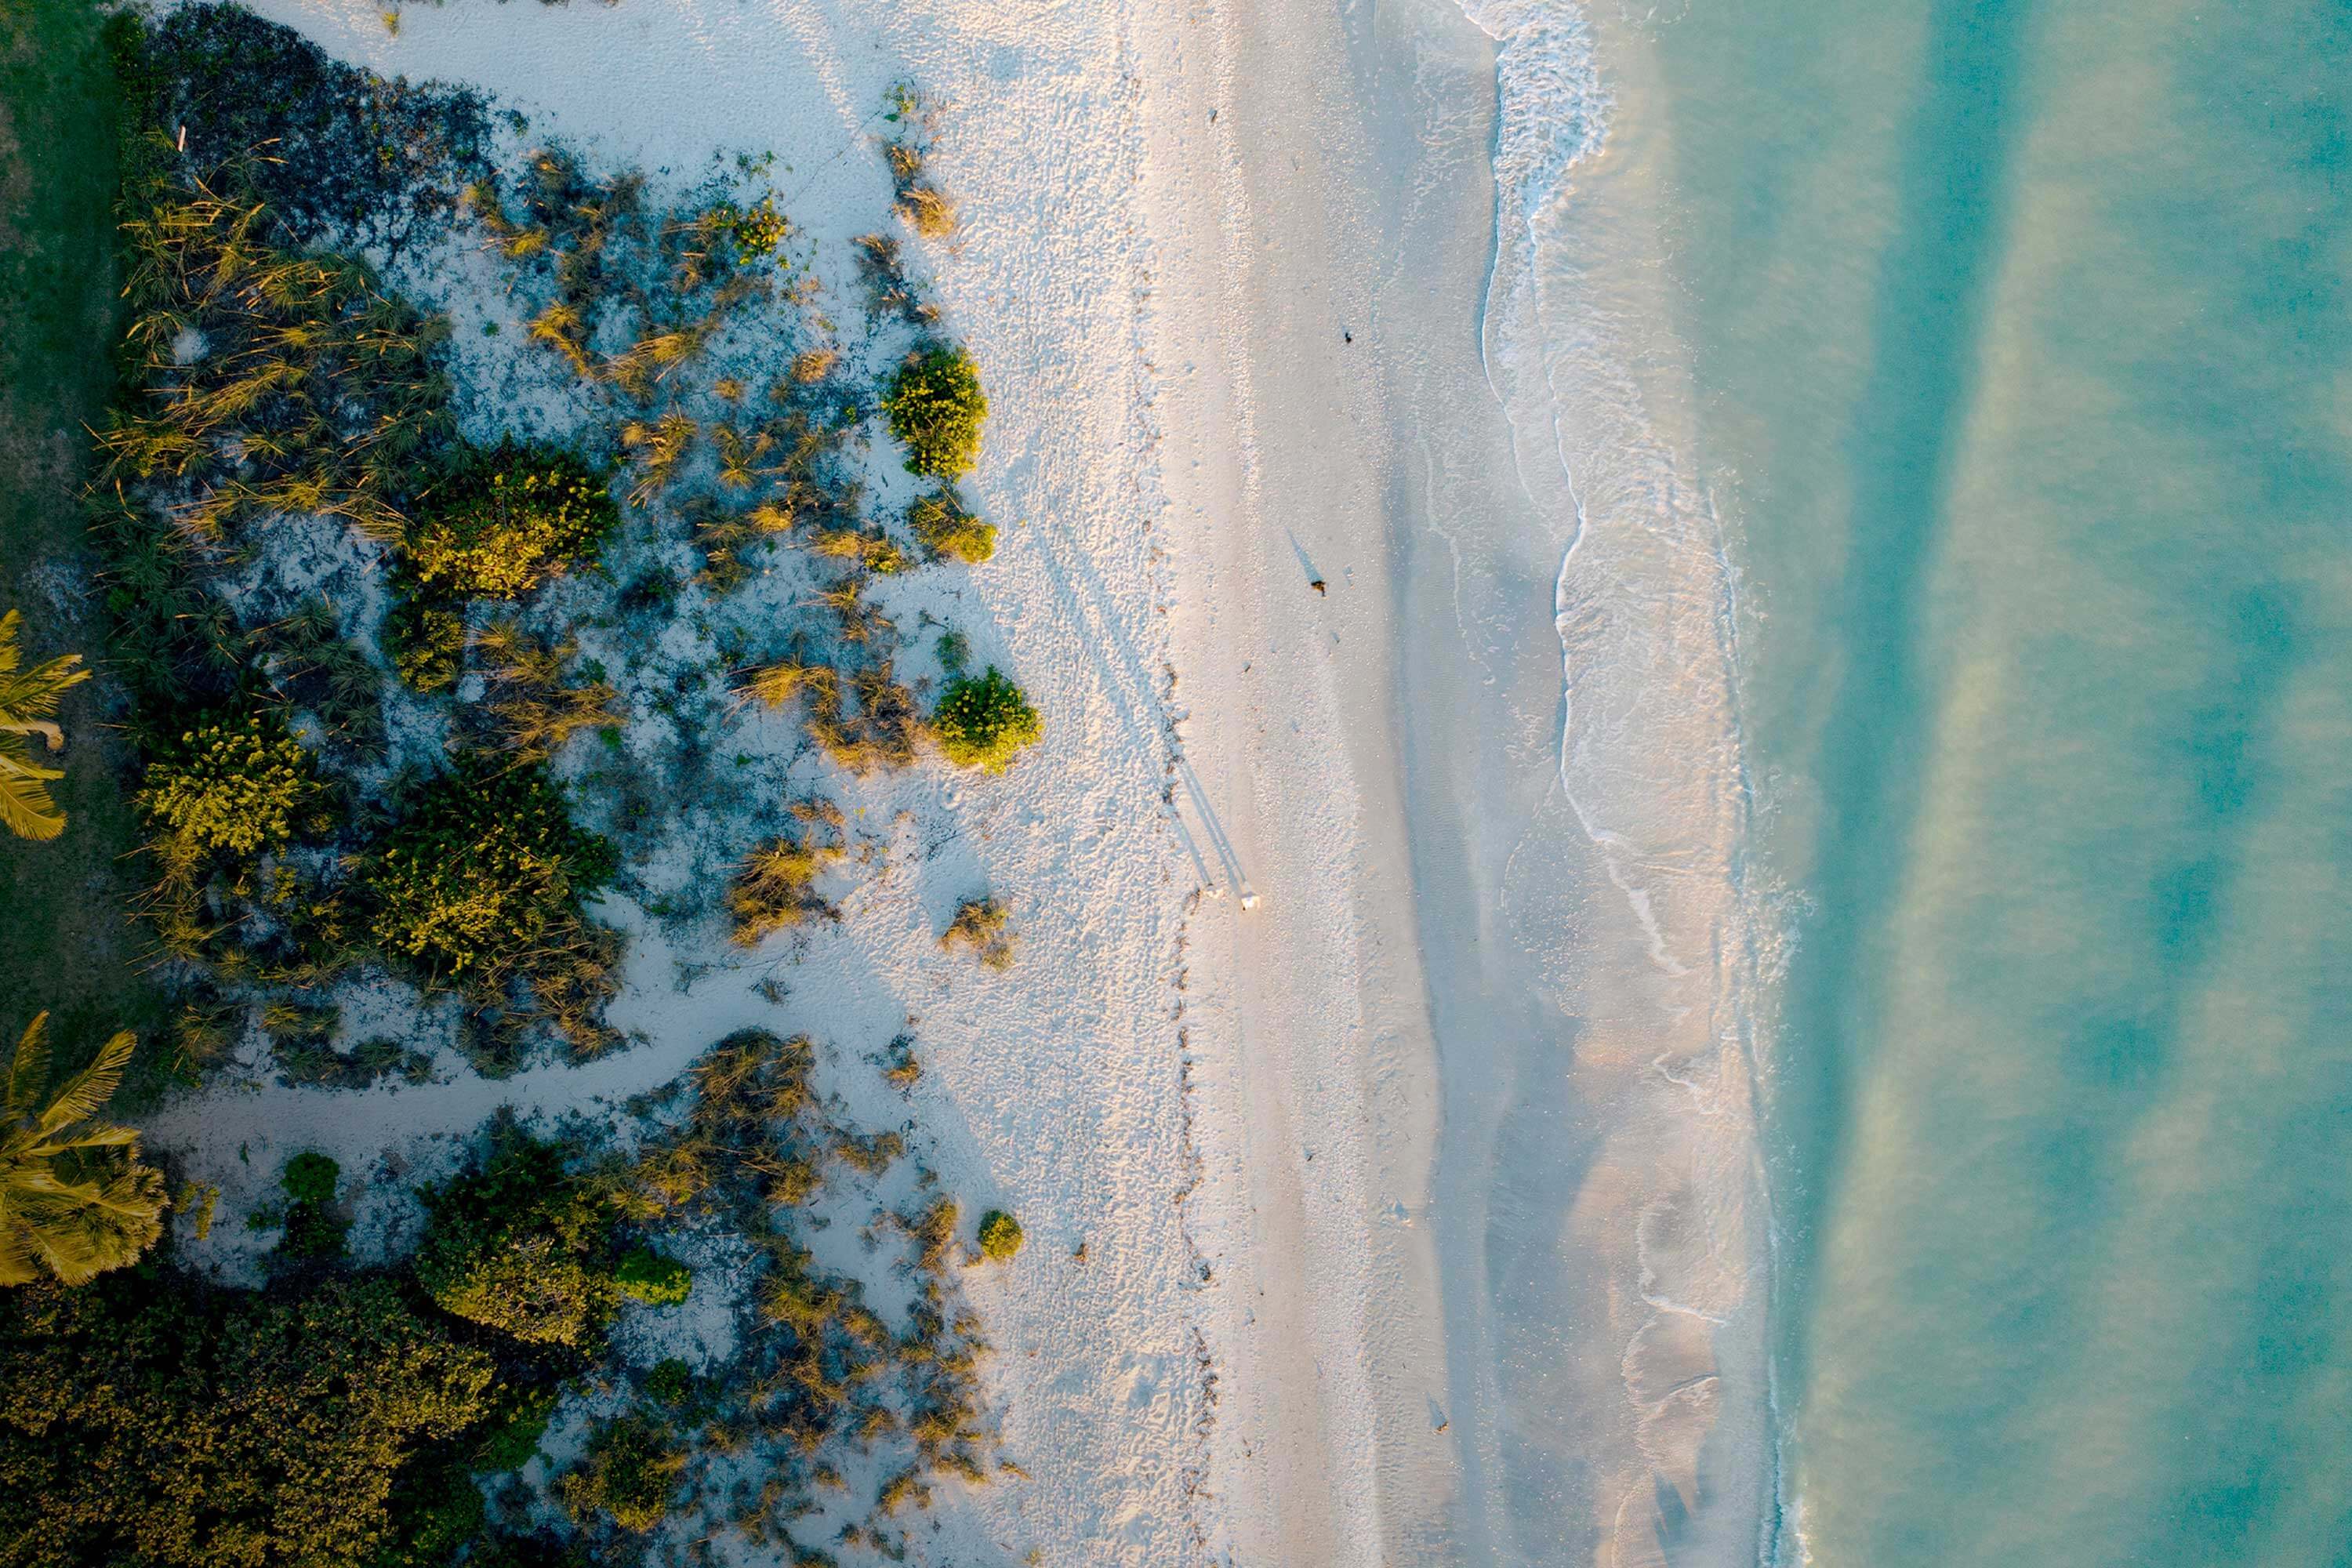 Overhead shot of the Florida coast. Bushes line the beach on the left, and a person is walking down the center of the photo just in front of the water.